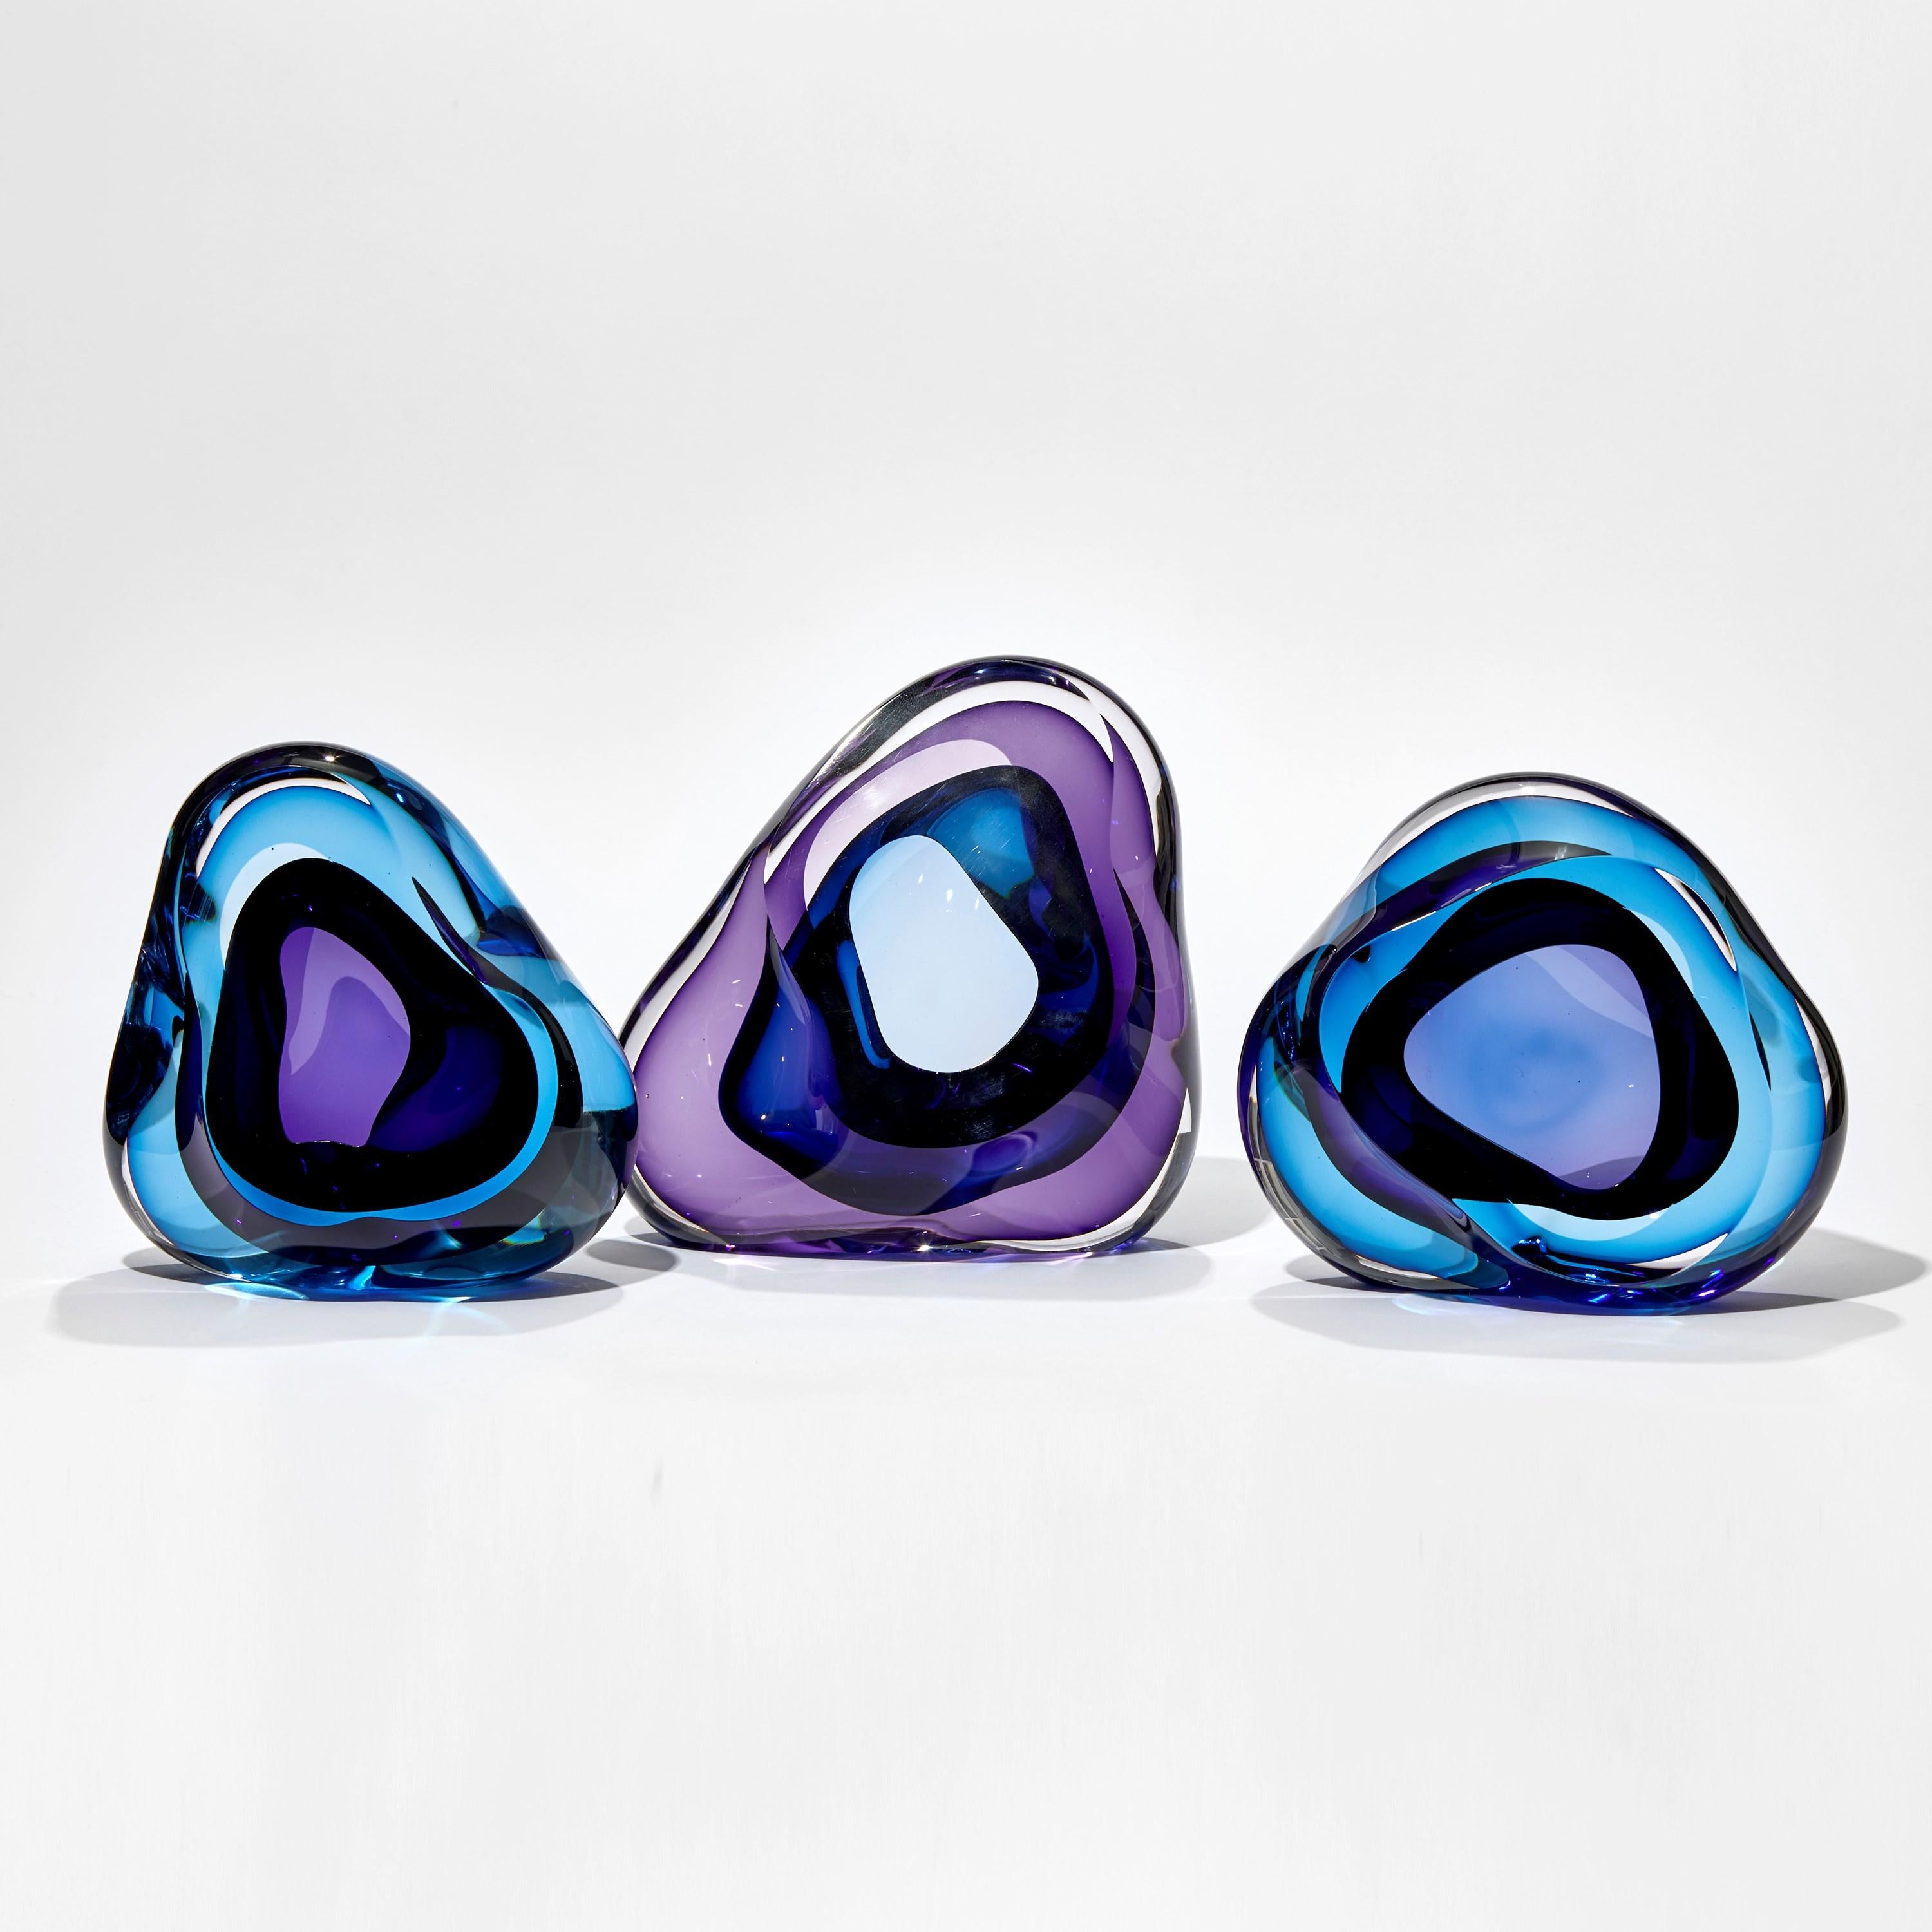 British Vug in Turquoise and Purple, Glass Geode Sculpture by Samantha Donaldson For Sale